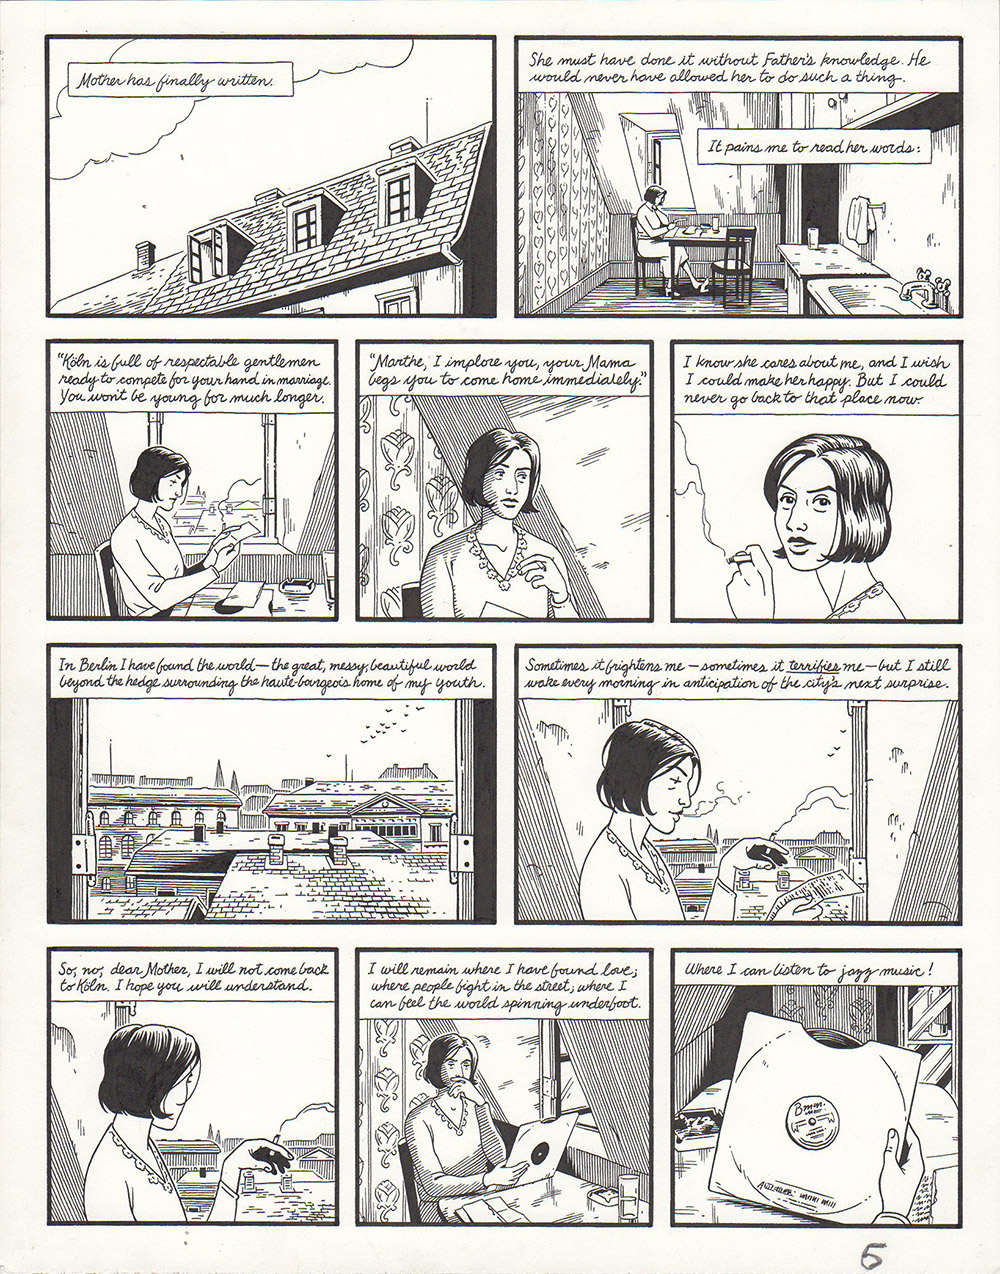 Berlin - page 236-238 Book Two: City of Smoke - page 036-38